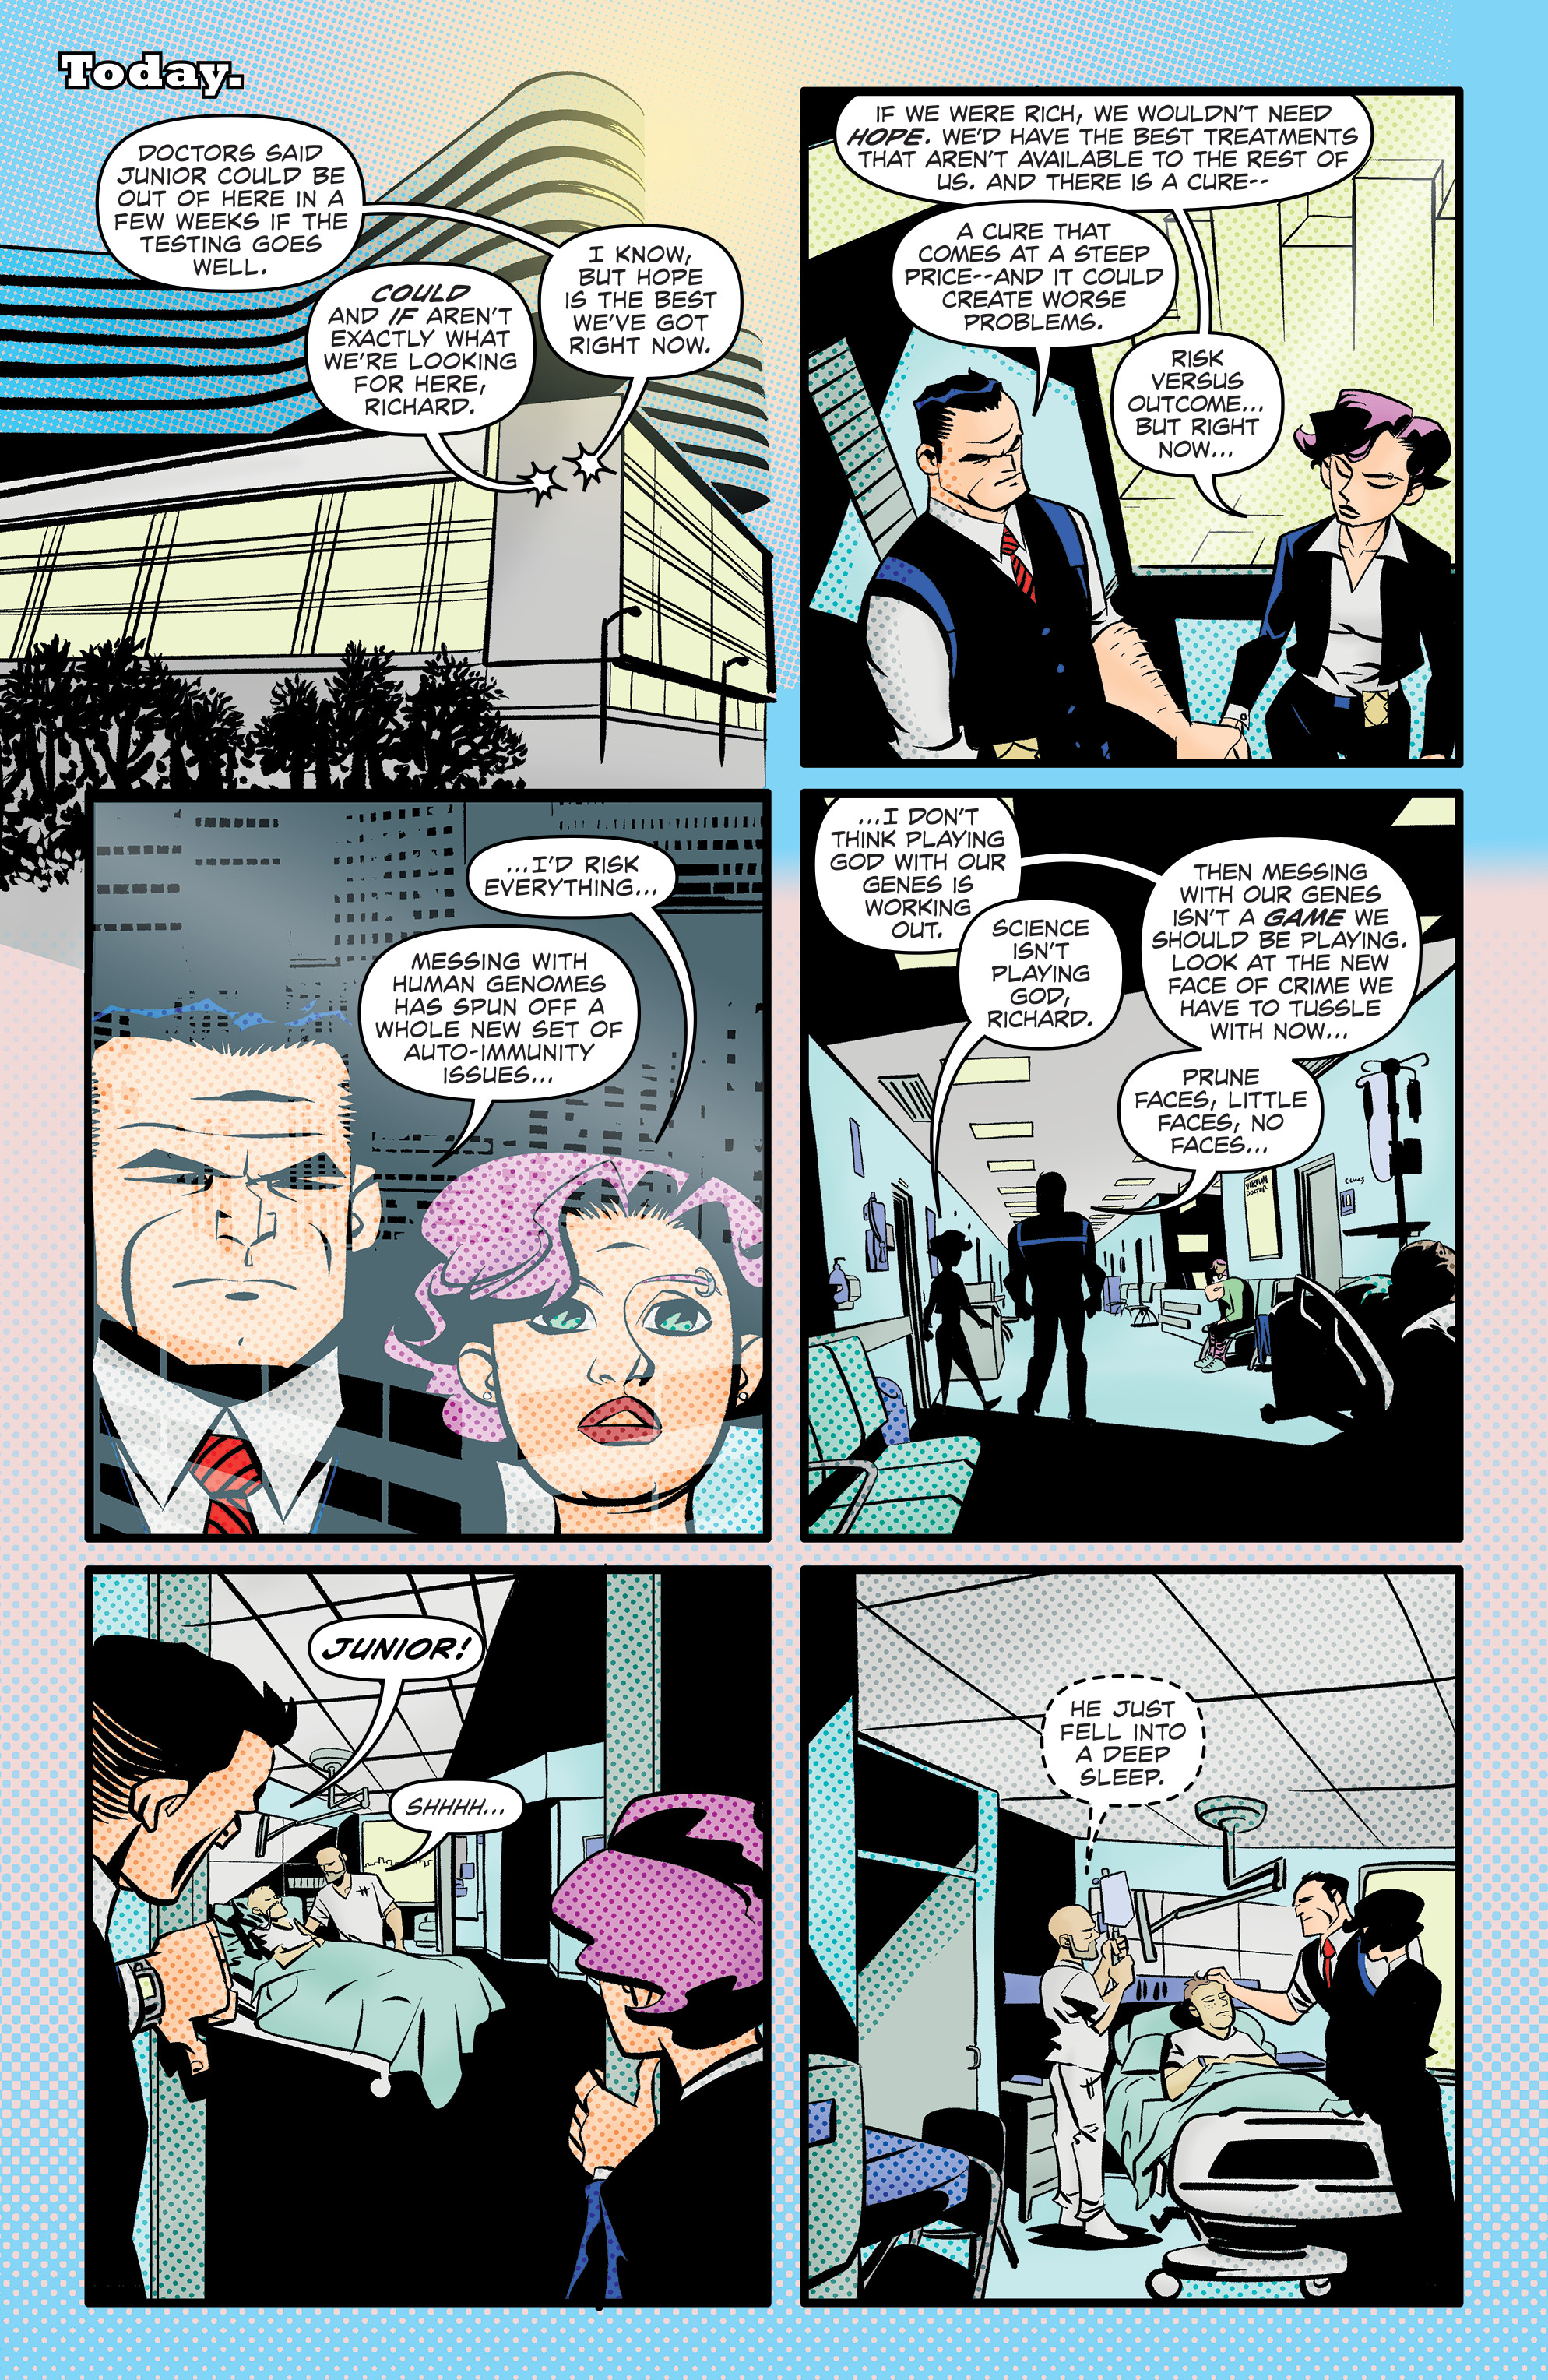 Dick Tracy Forever (2019-): Chapter 3 - Page 4